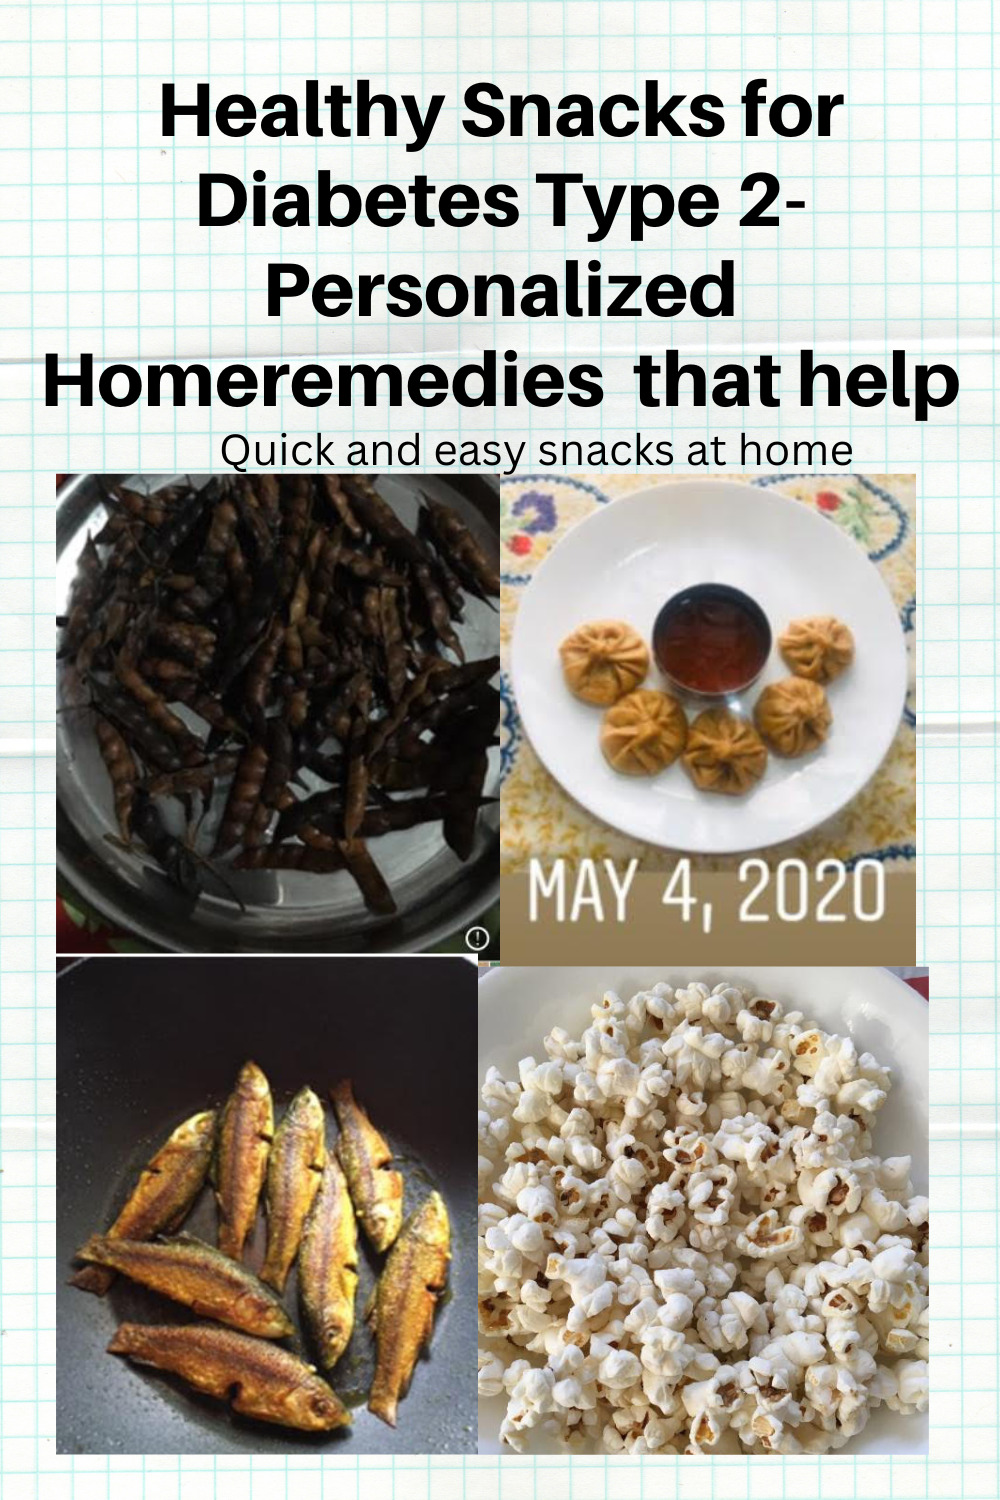 Healthy-Homemade-Snacks-Personalized-Homeremedes-for-Diabetes-Type-2-pic-1